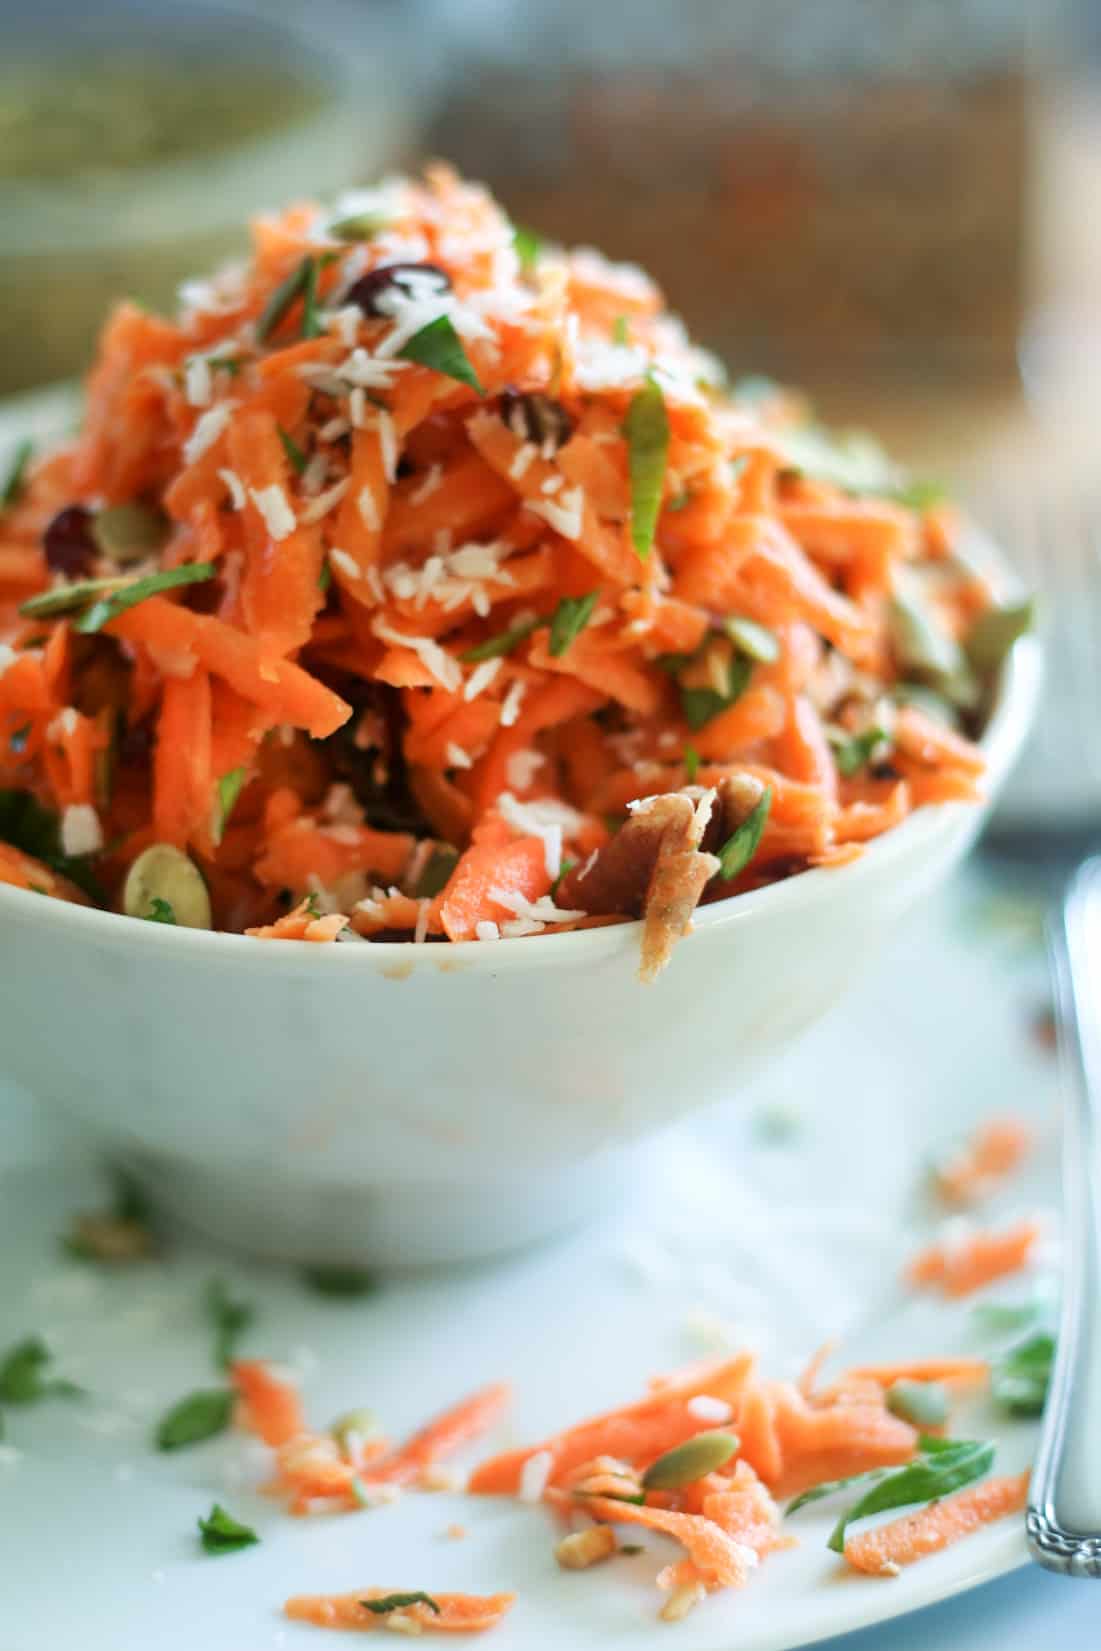 carrot salad with raisins and walnuts